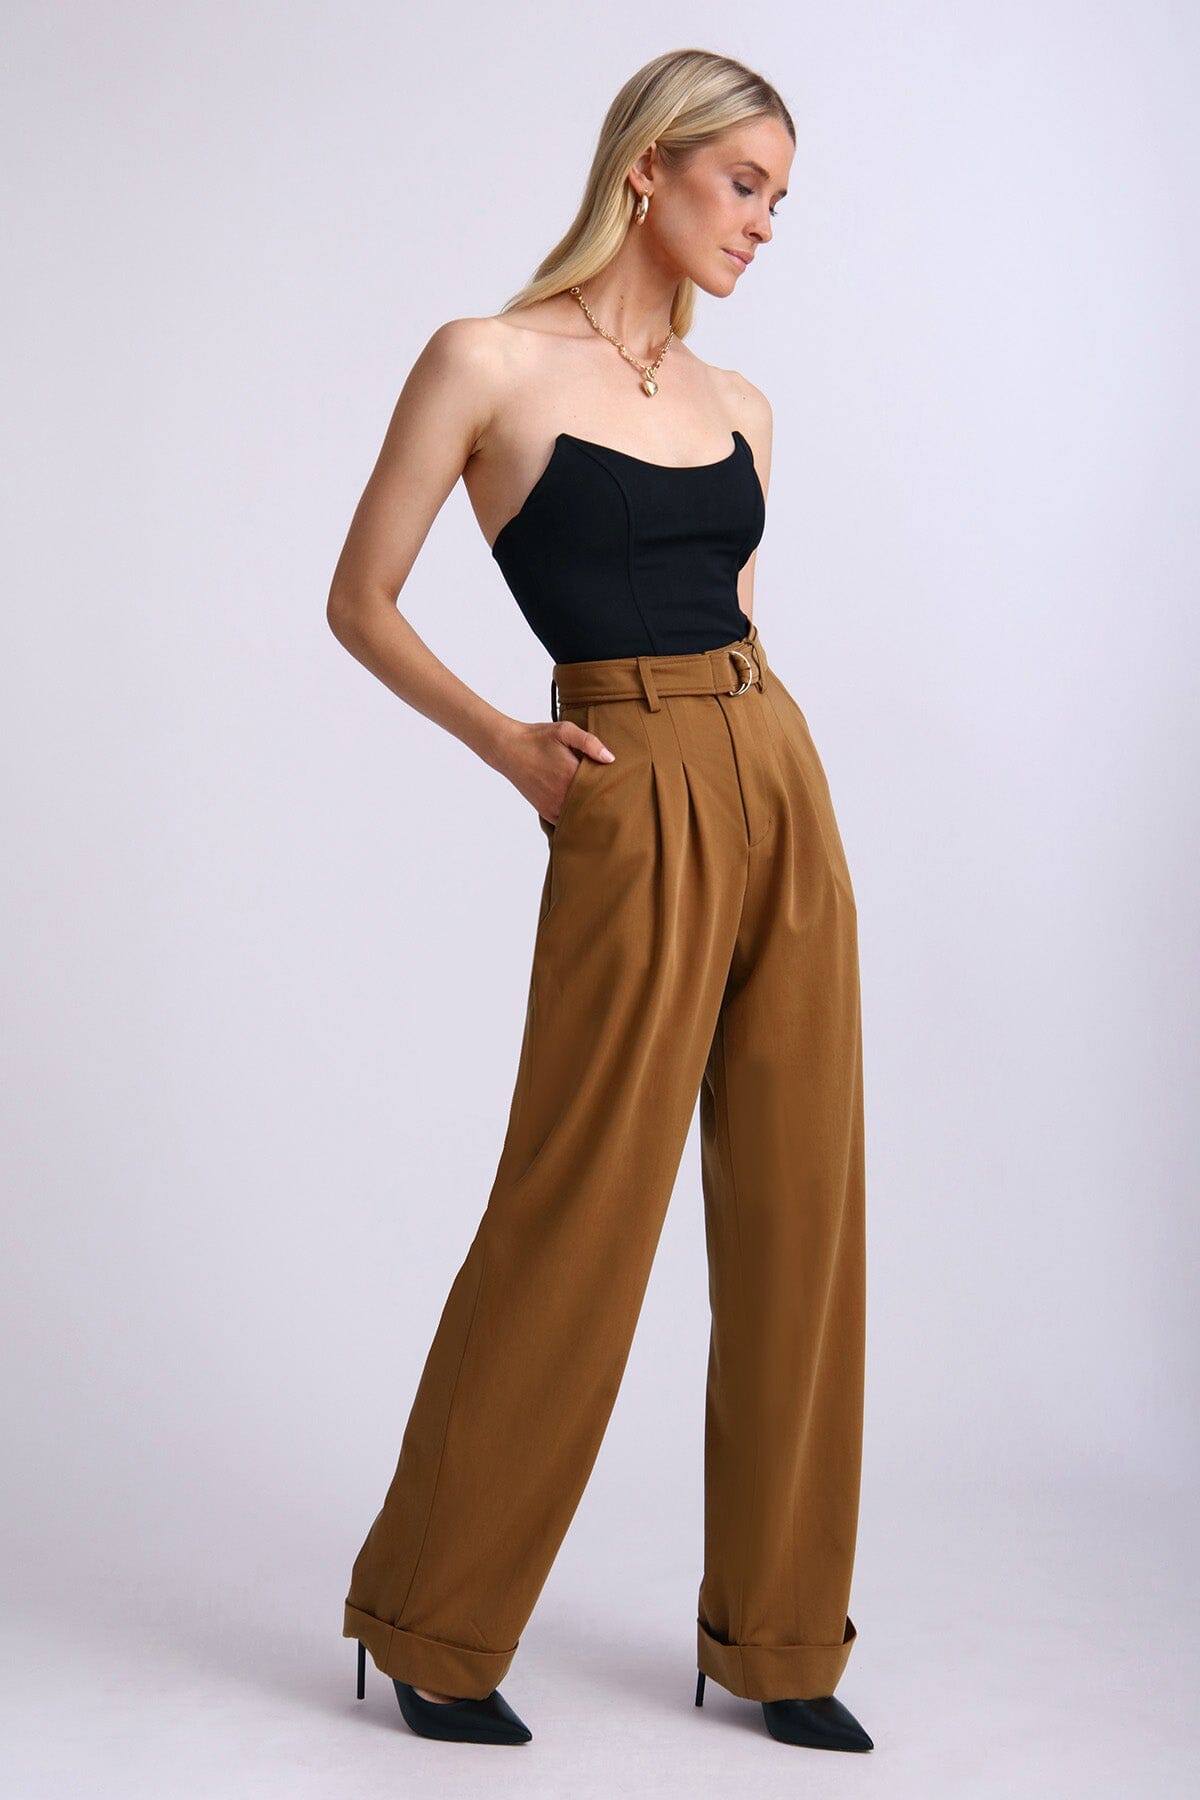 Amber brown lyocell blend belted wide leg trouser pant - figure flattering comfortable work pants for ladies by avec les filles